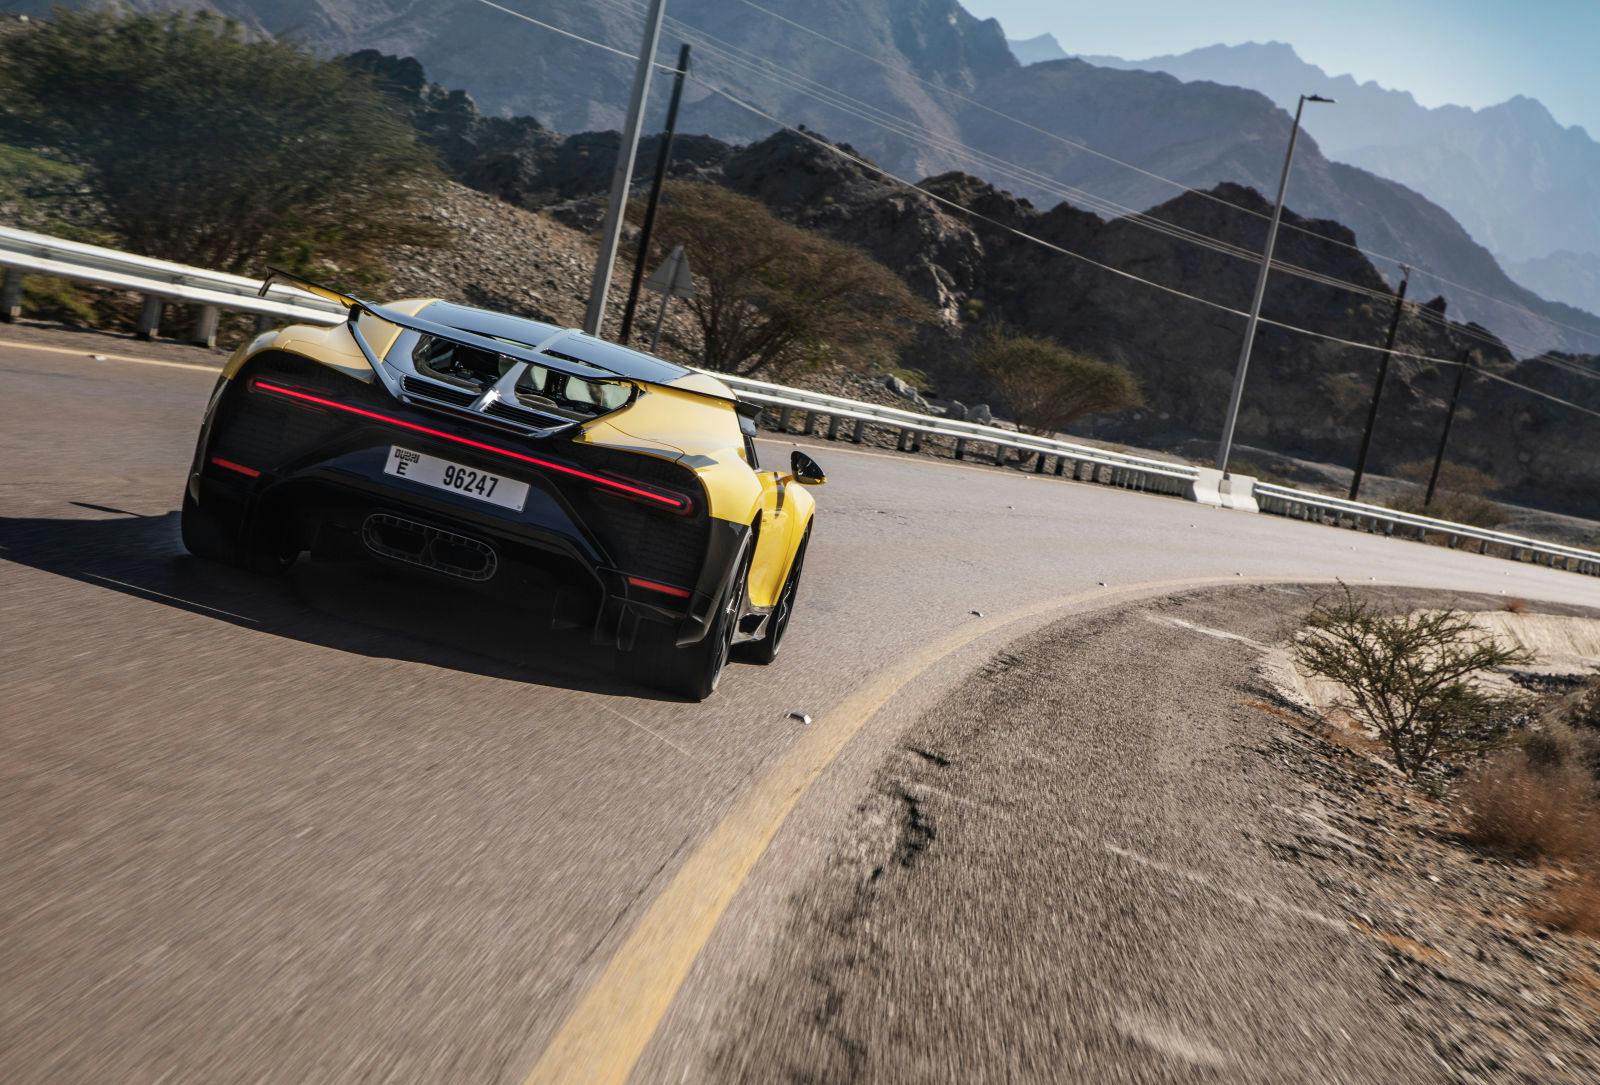 The most agile member of the Chiron family demonstrates its skills on the winding roads around Hatta.